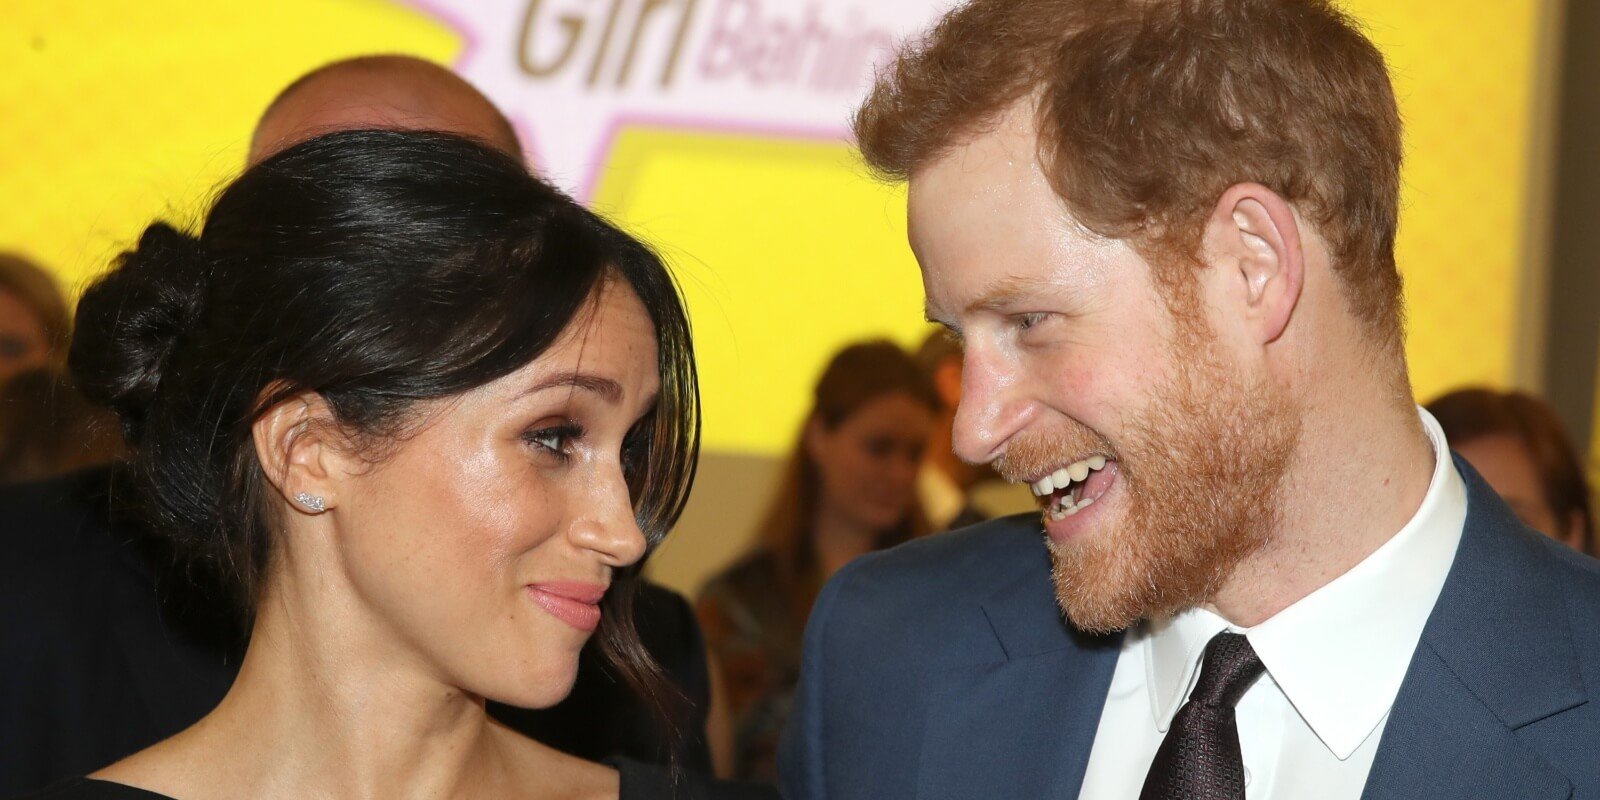 Meghan Markle smiles at Prince Harry in 2018.